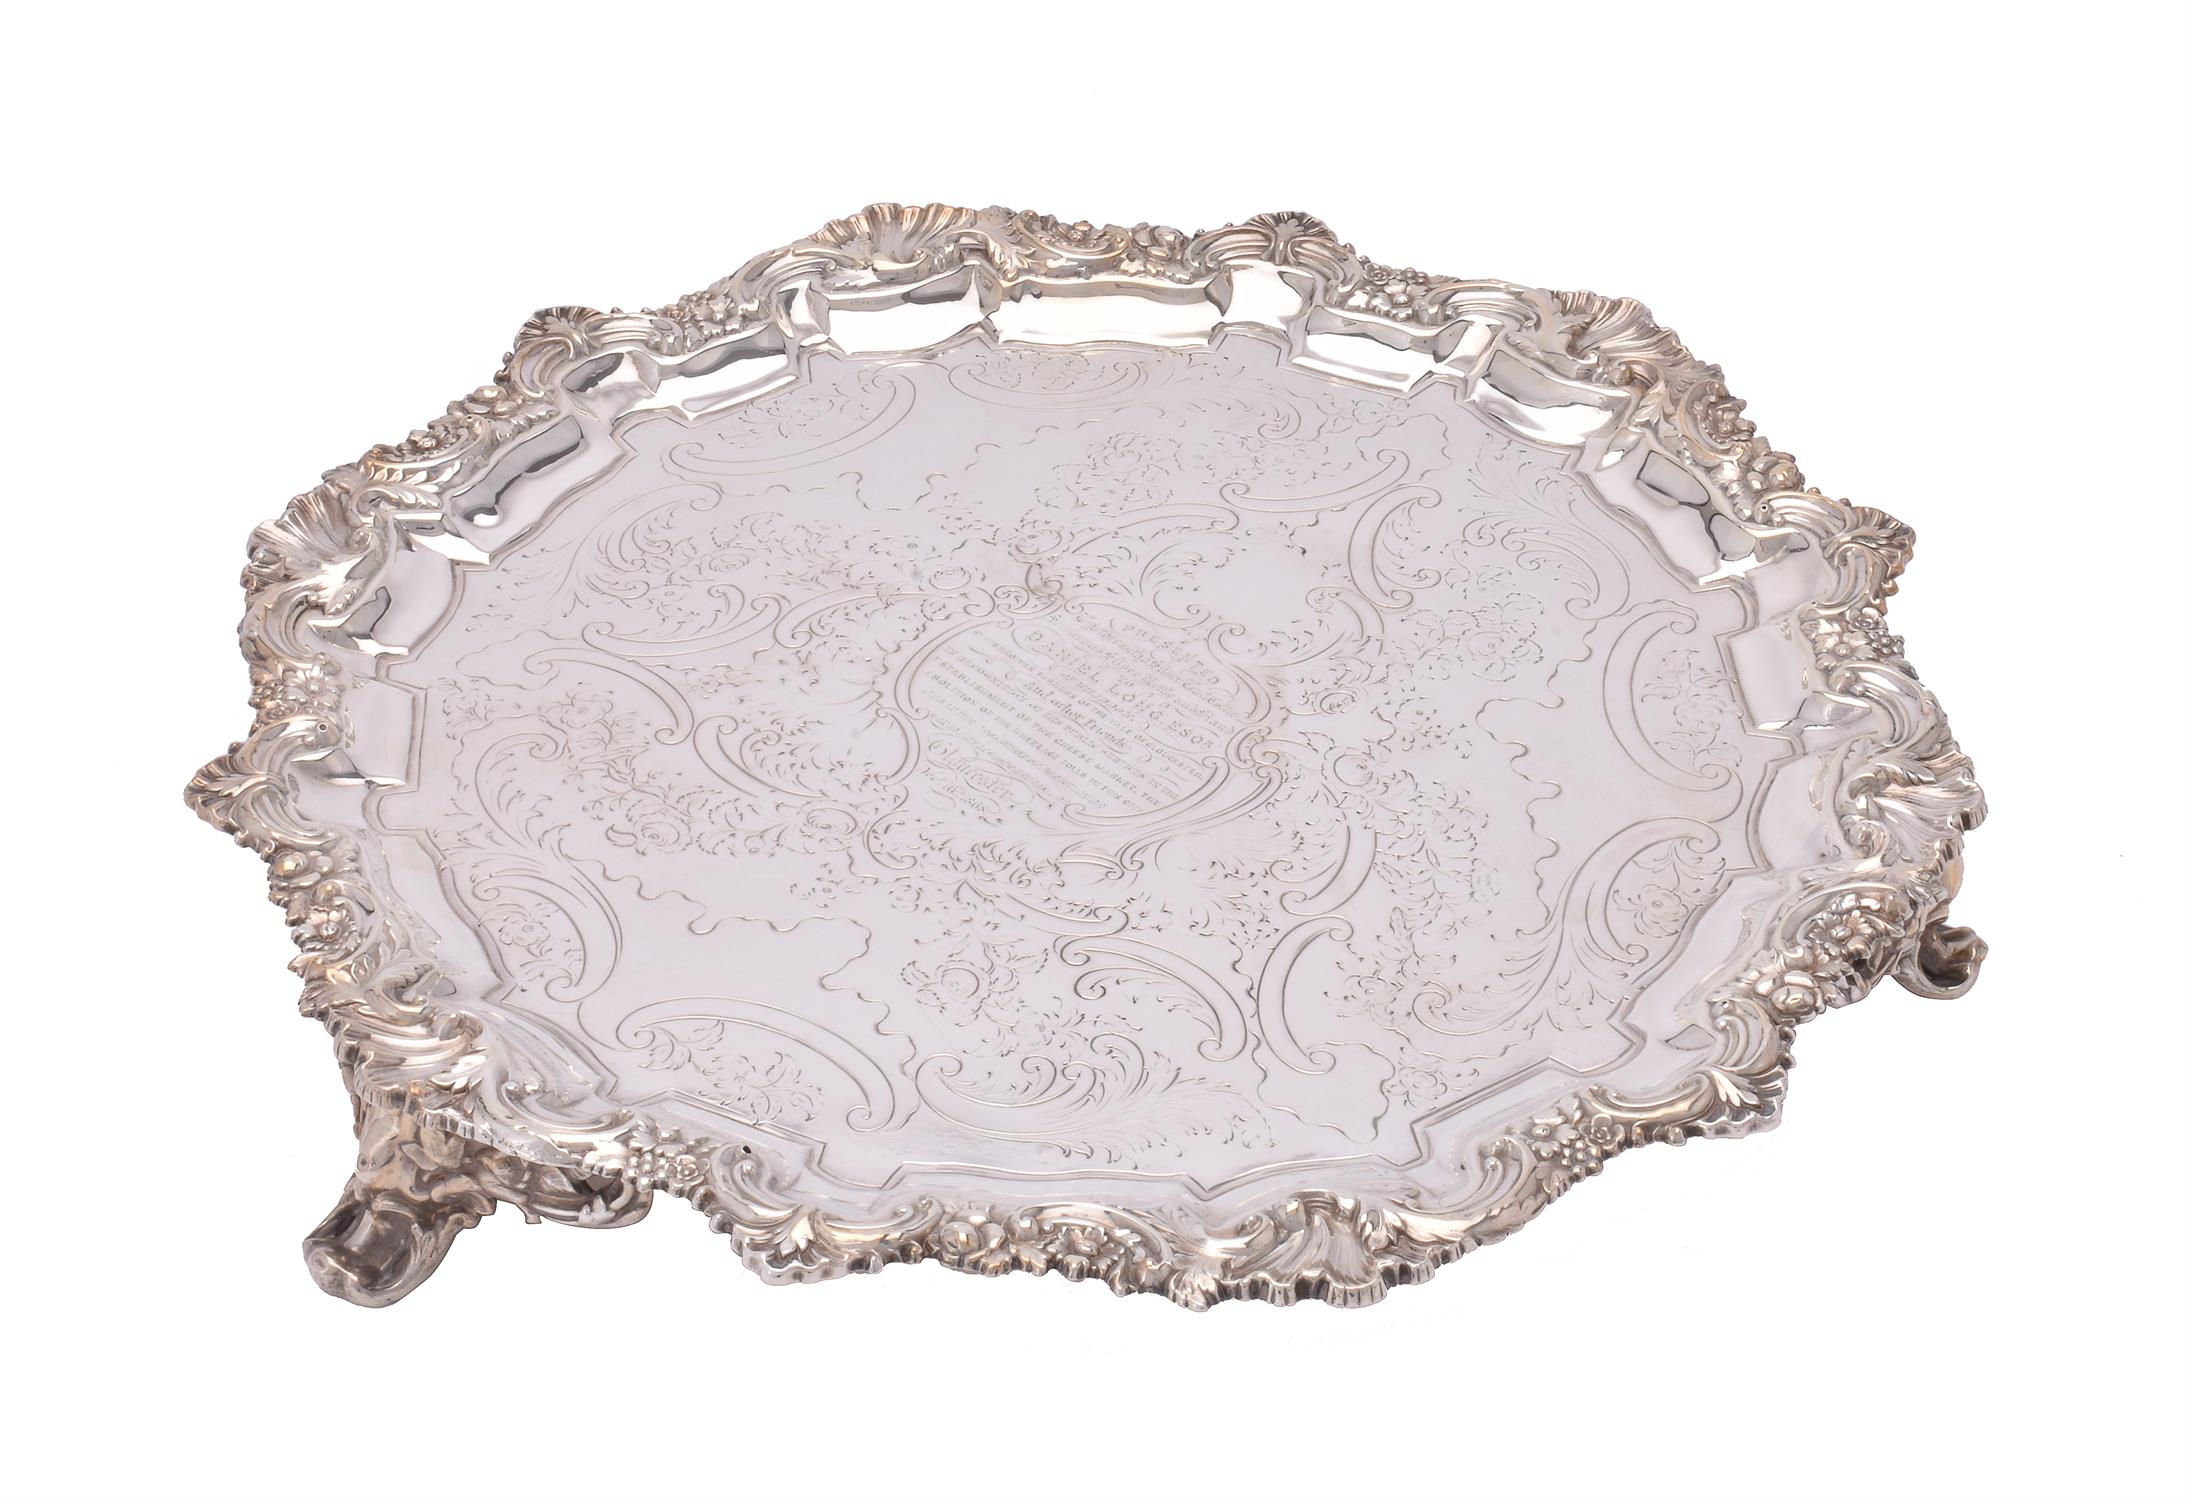 A William IV silver shaped circular salver by Henry Wilkinson & Co.